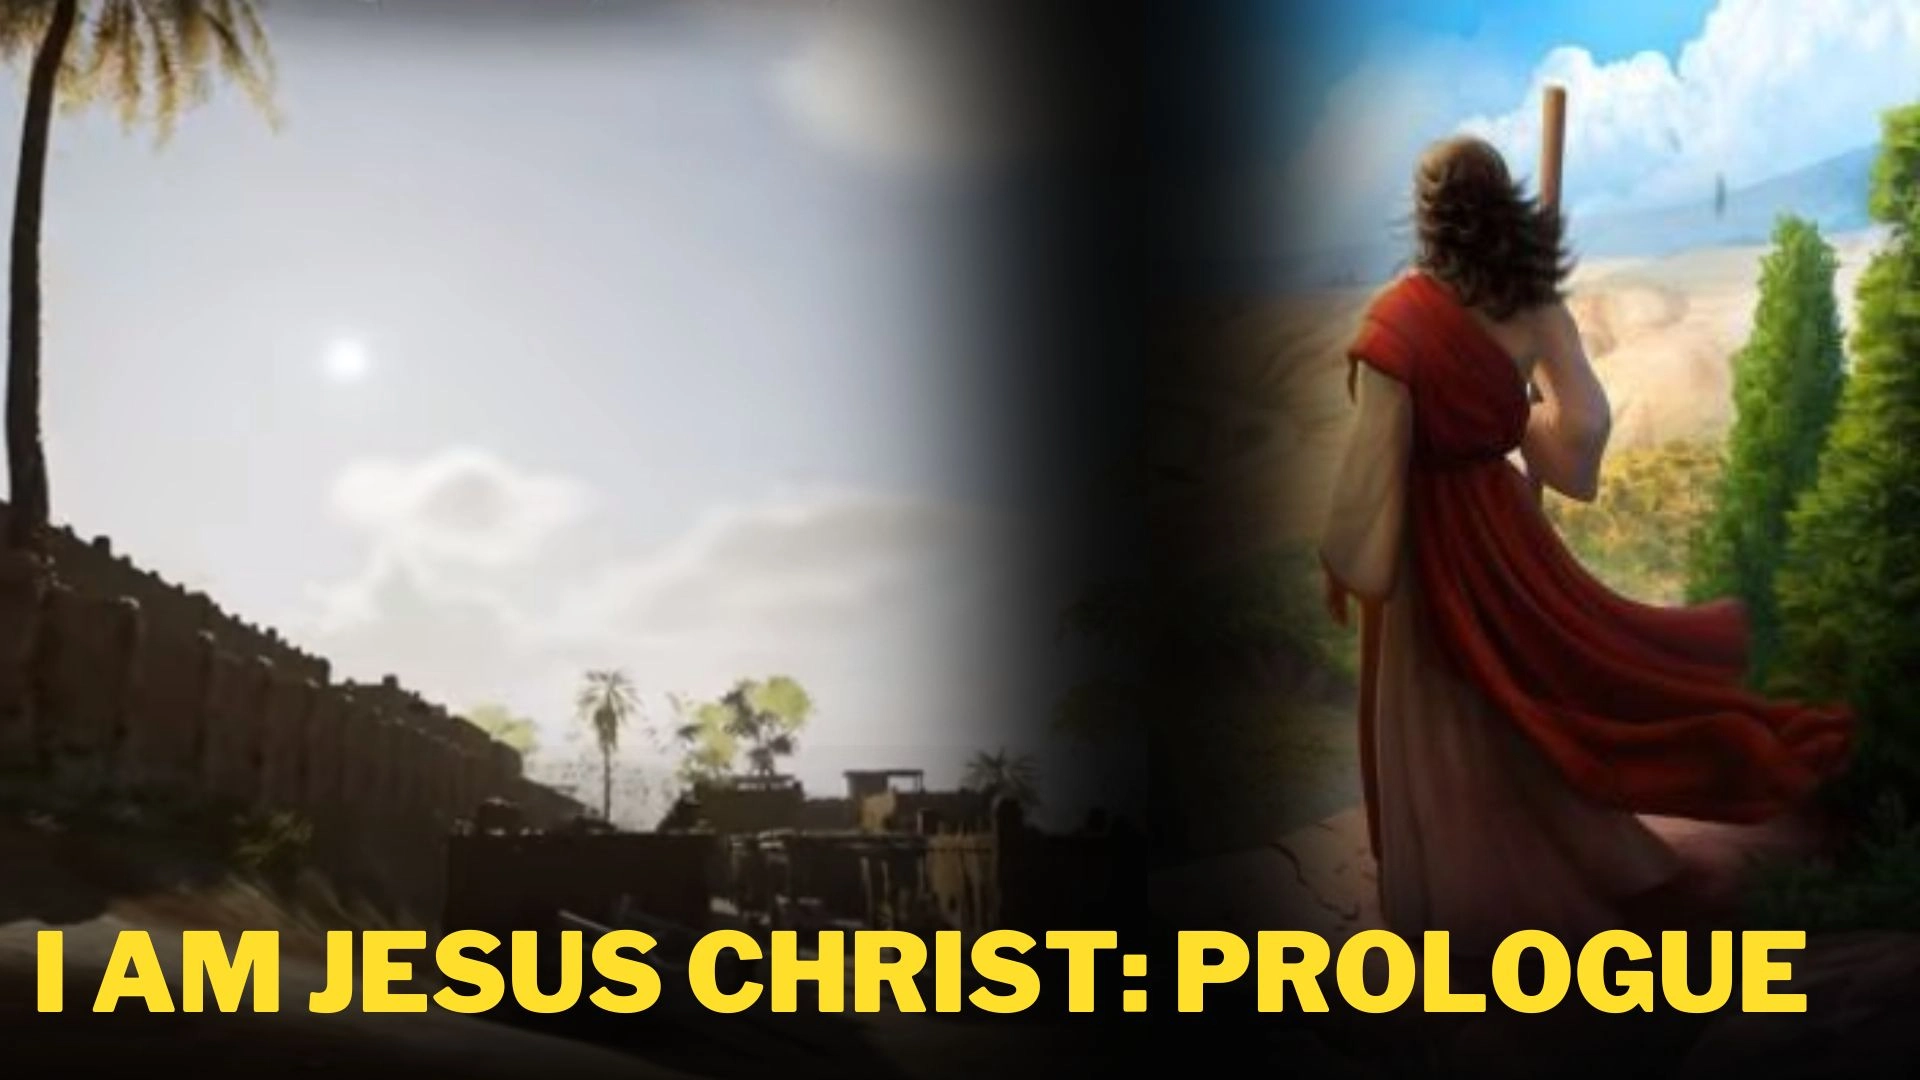 I Am Jesus Christ: Prologue Parents Guide and Age Rating